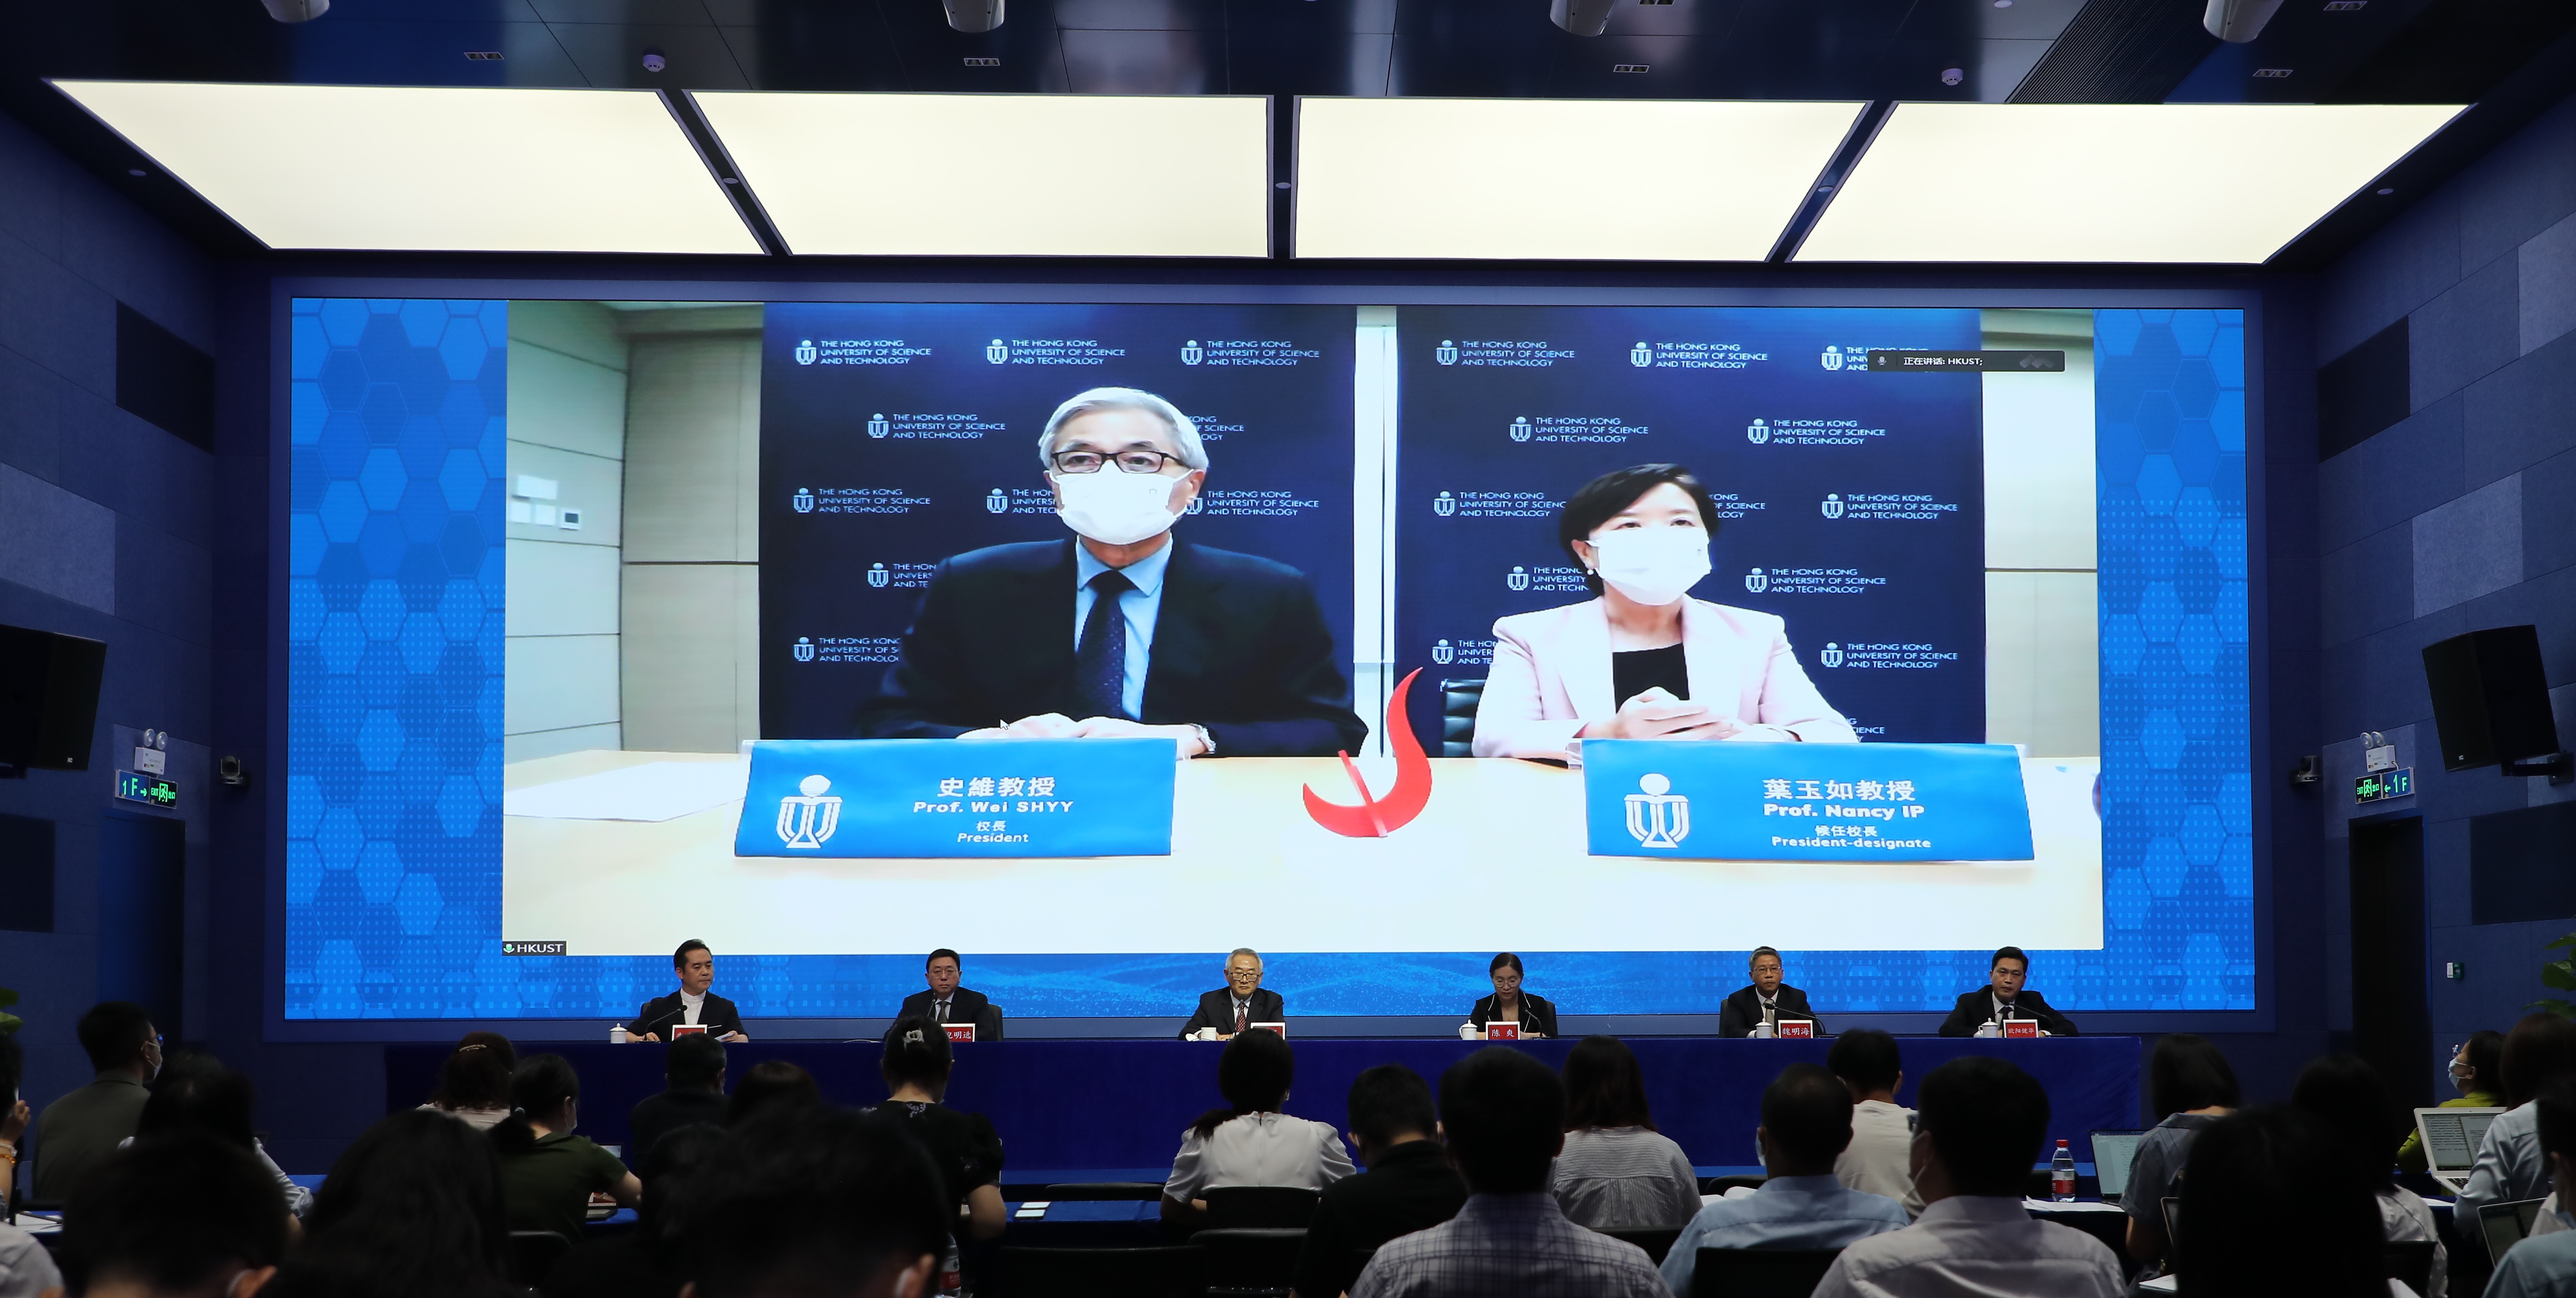 HKUST President Prof. Wei SHYY (left) and HKUST President-designate Prof. Nancy IP (right) join the press conference online.